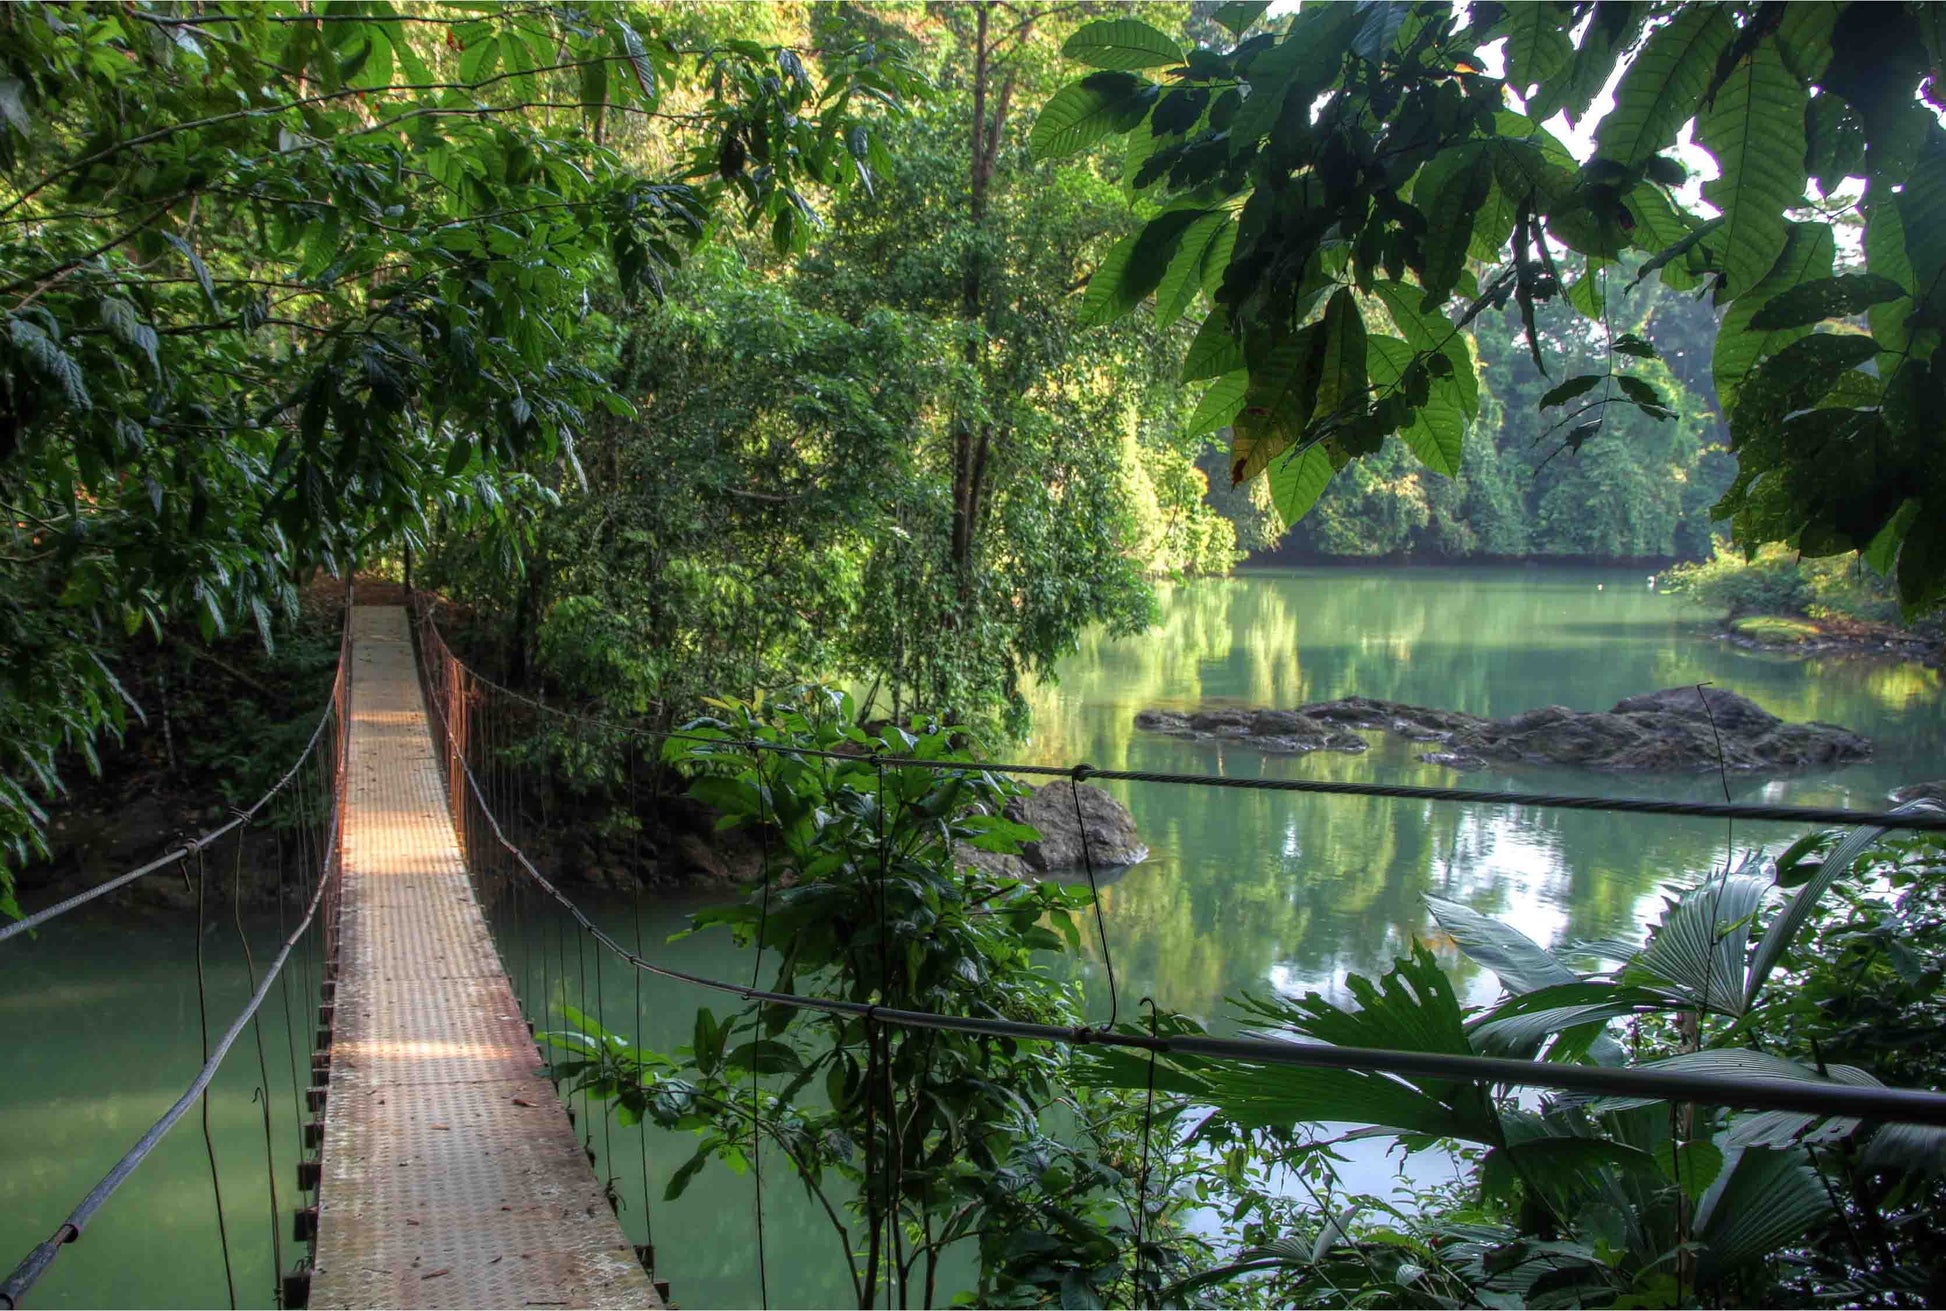 A hanging bridge over the Rio Celeste during a small group travel excursion.